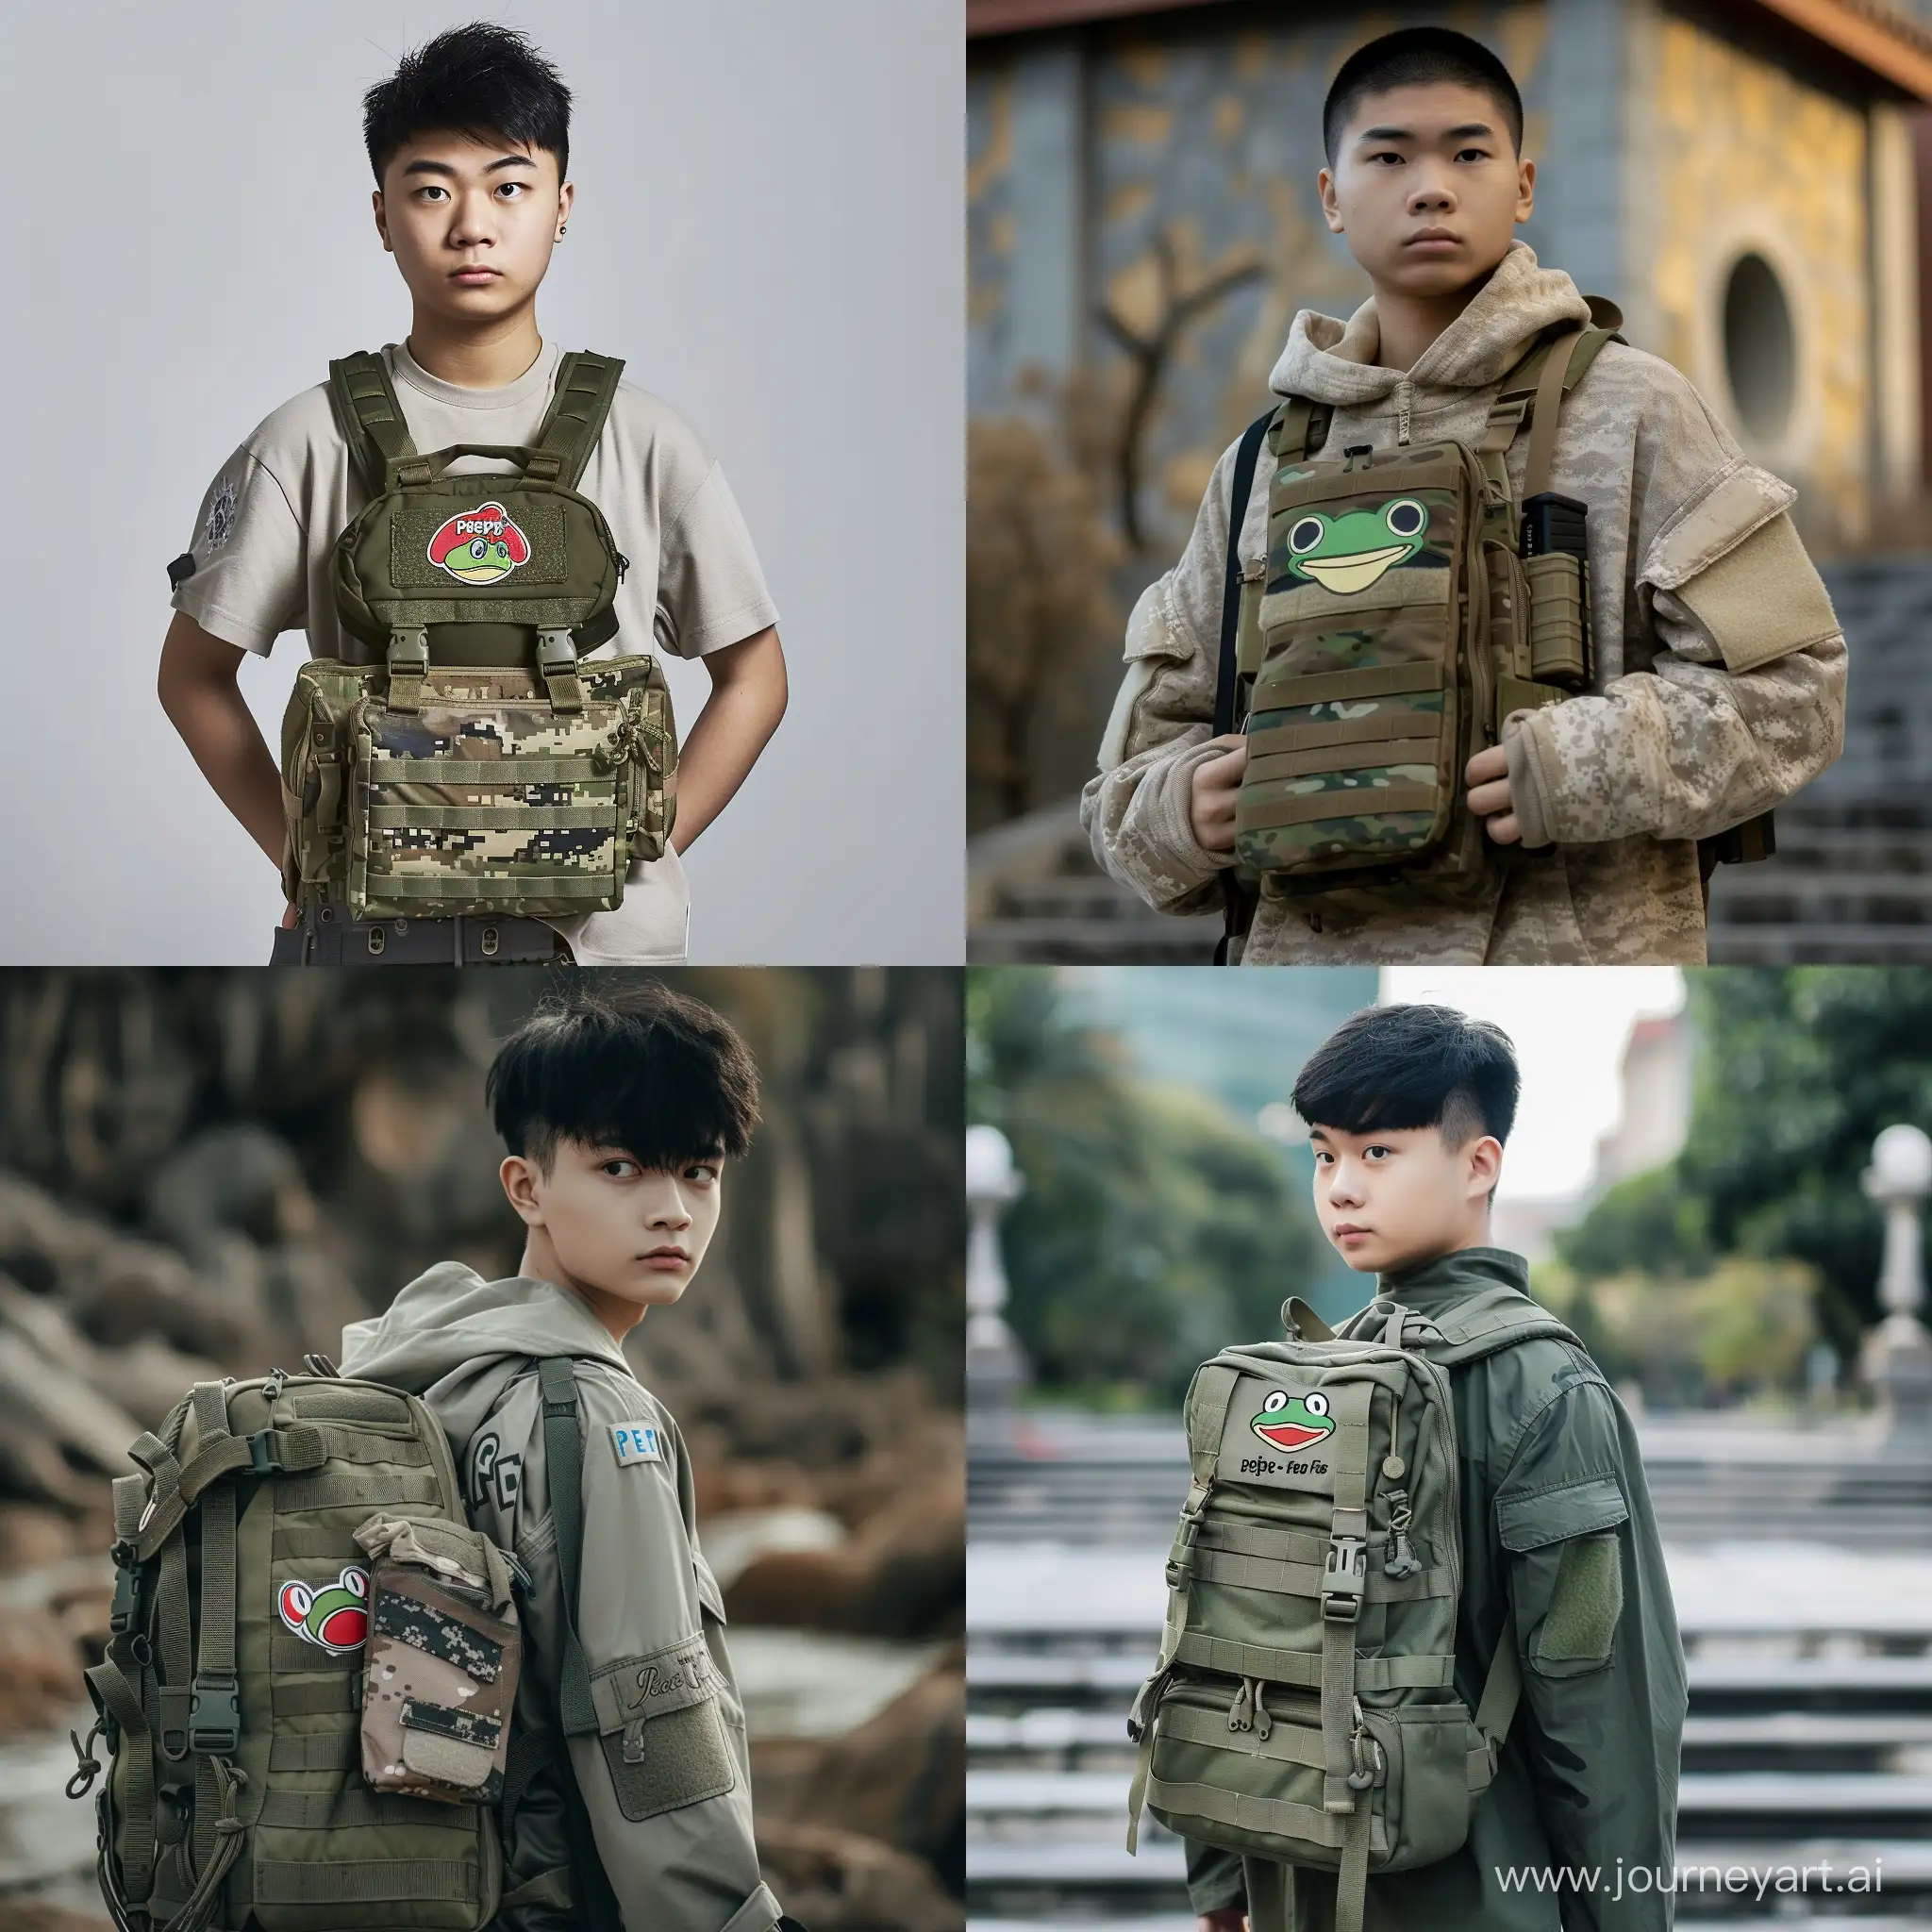 Asian-Male-with-Military-Pack-and-Pepe-the-Frog-Logo